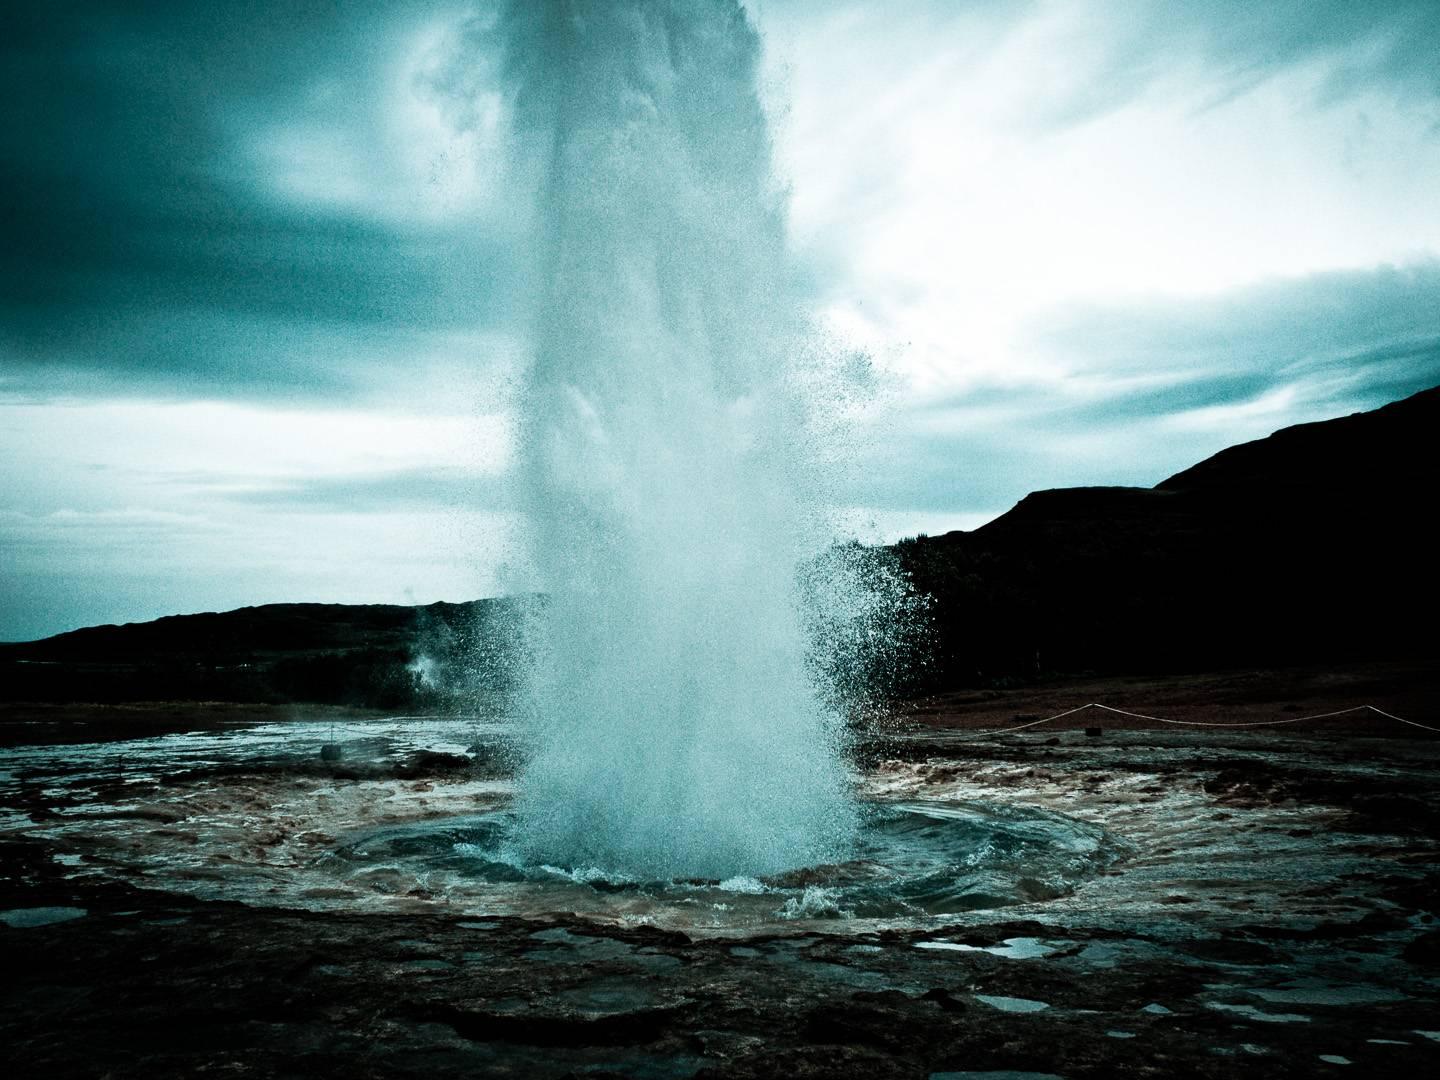 David Jay Color Photograph - Geyser #1, Nude photography in color